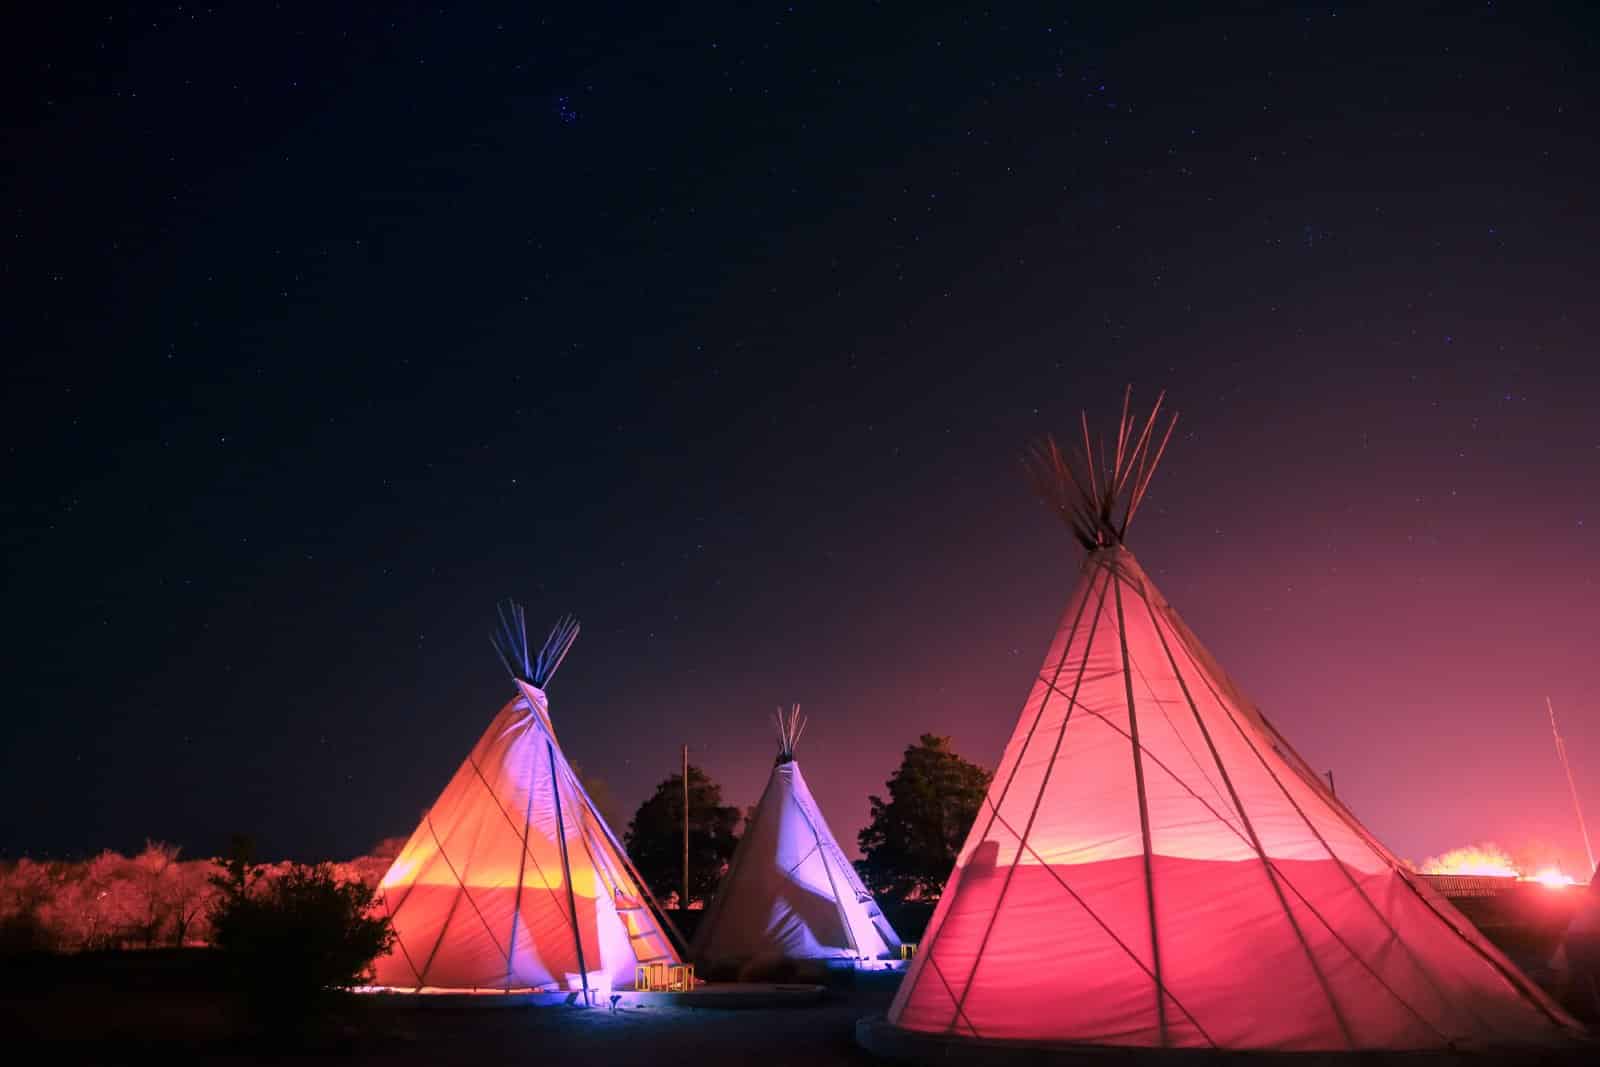 Image Credit: Shutterstock / Tom Windeknecht <p>Marfa provides a quirky arts scene set against a desert backdrop, ideal for those looking to dodge the typical tourist experience. Its minimalist aesthetic is a clear canvas for thinking and unwinding. Plus, its affordability will have you wondering why you ever vacationed in big cities.</p>